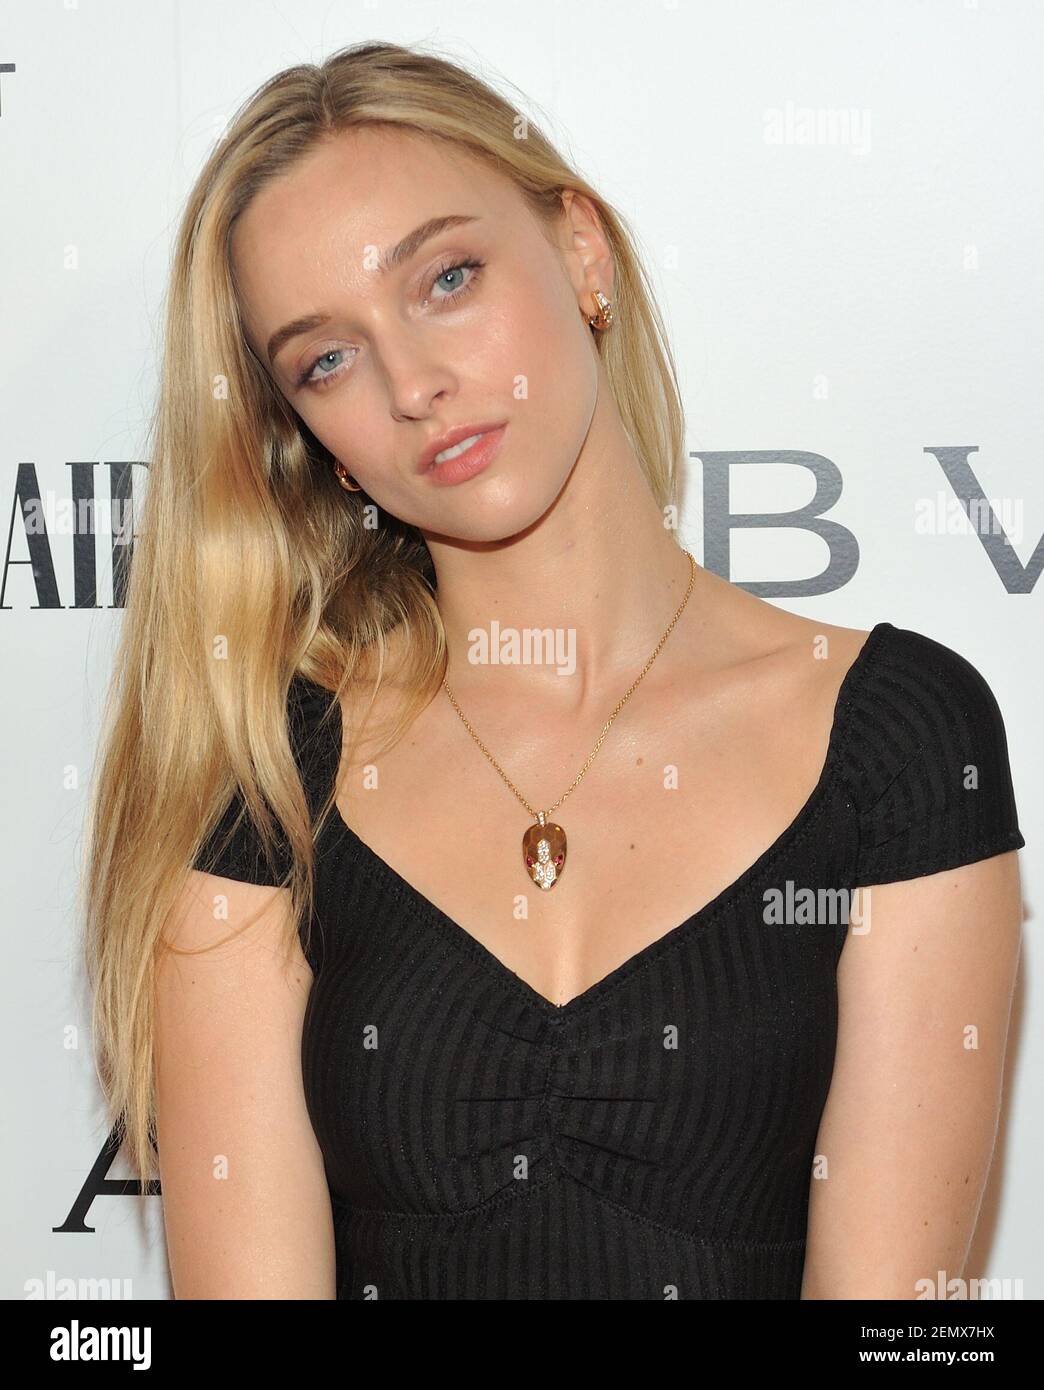 Model Marcelina Sowa attends the Bvlgari world premiere of Celestial and The Fourth Wave at Spring Studios in New York, NY on April 23, 2019.  (Photo by Stephen Smith/SIPA USA) Stock Photo